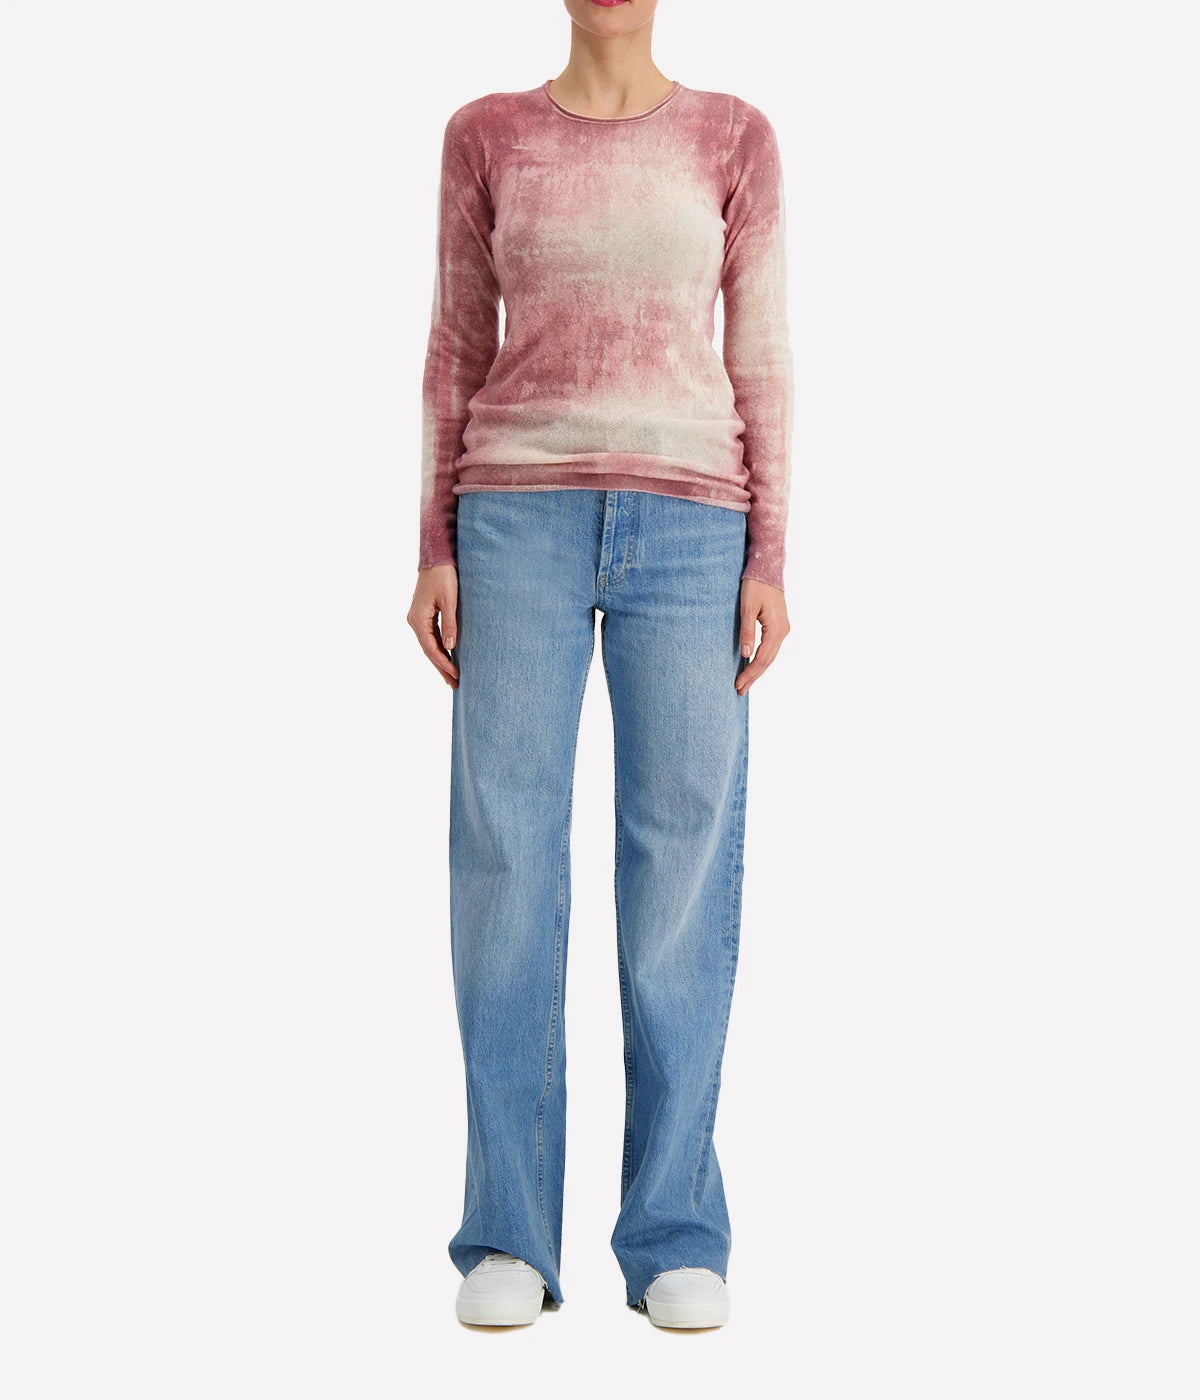 Marmo Effect Light Cashmere Round Neck in English Rose